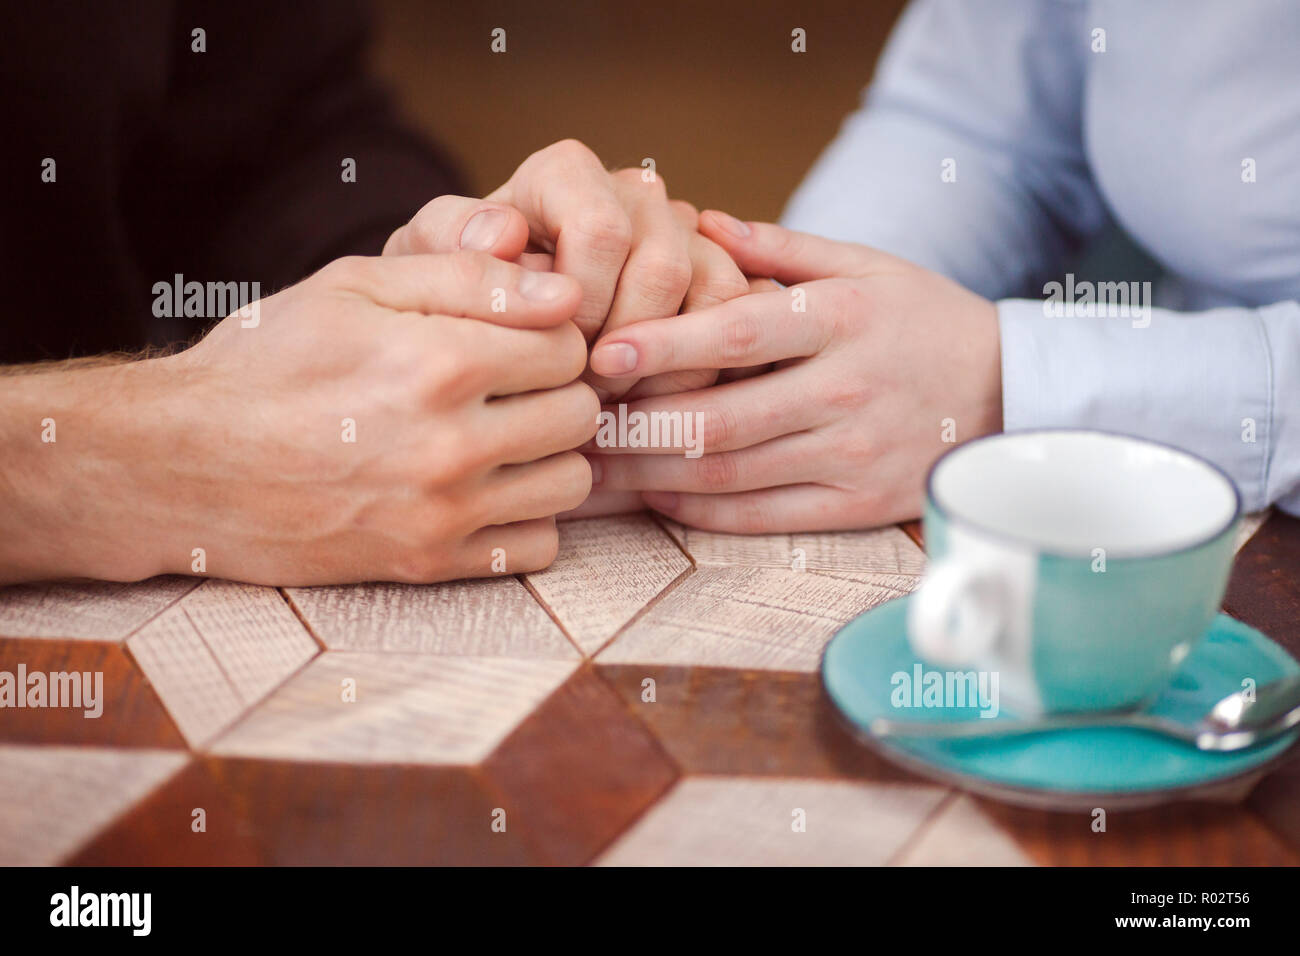 Crop loving couple holding hands at table Stock Photo